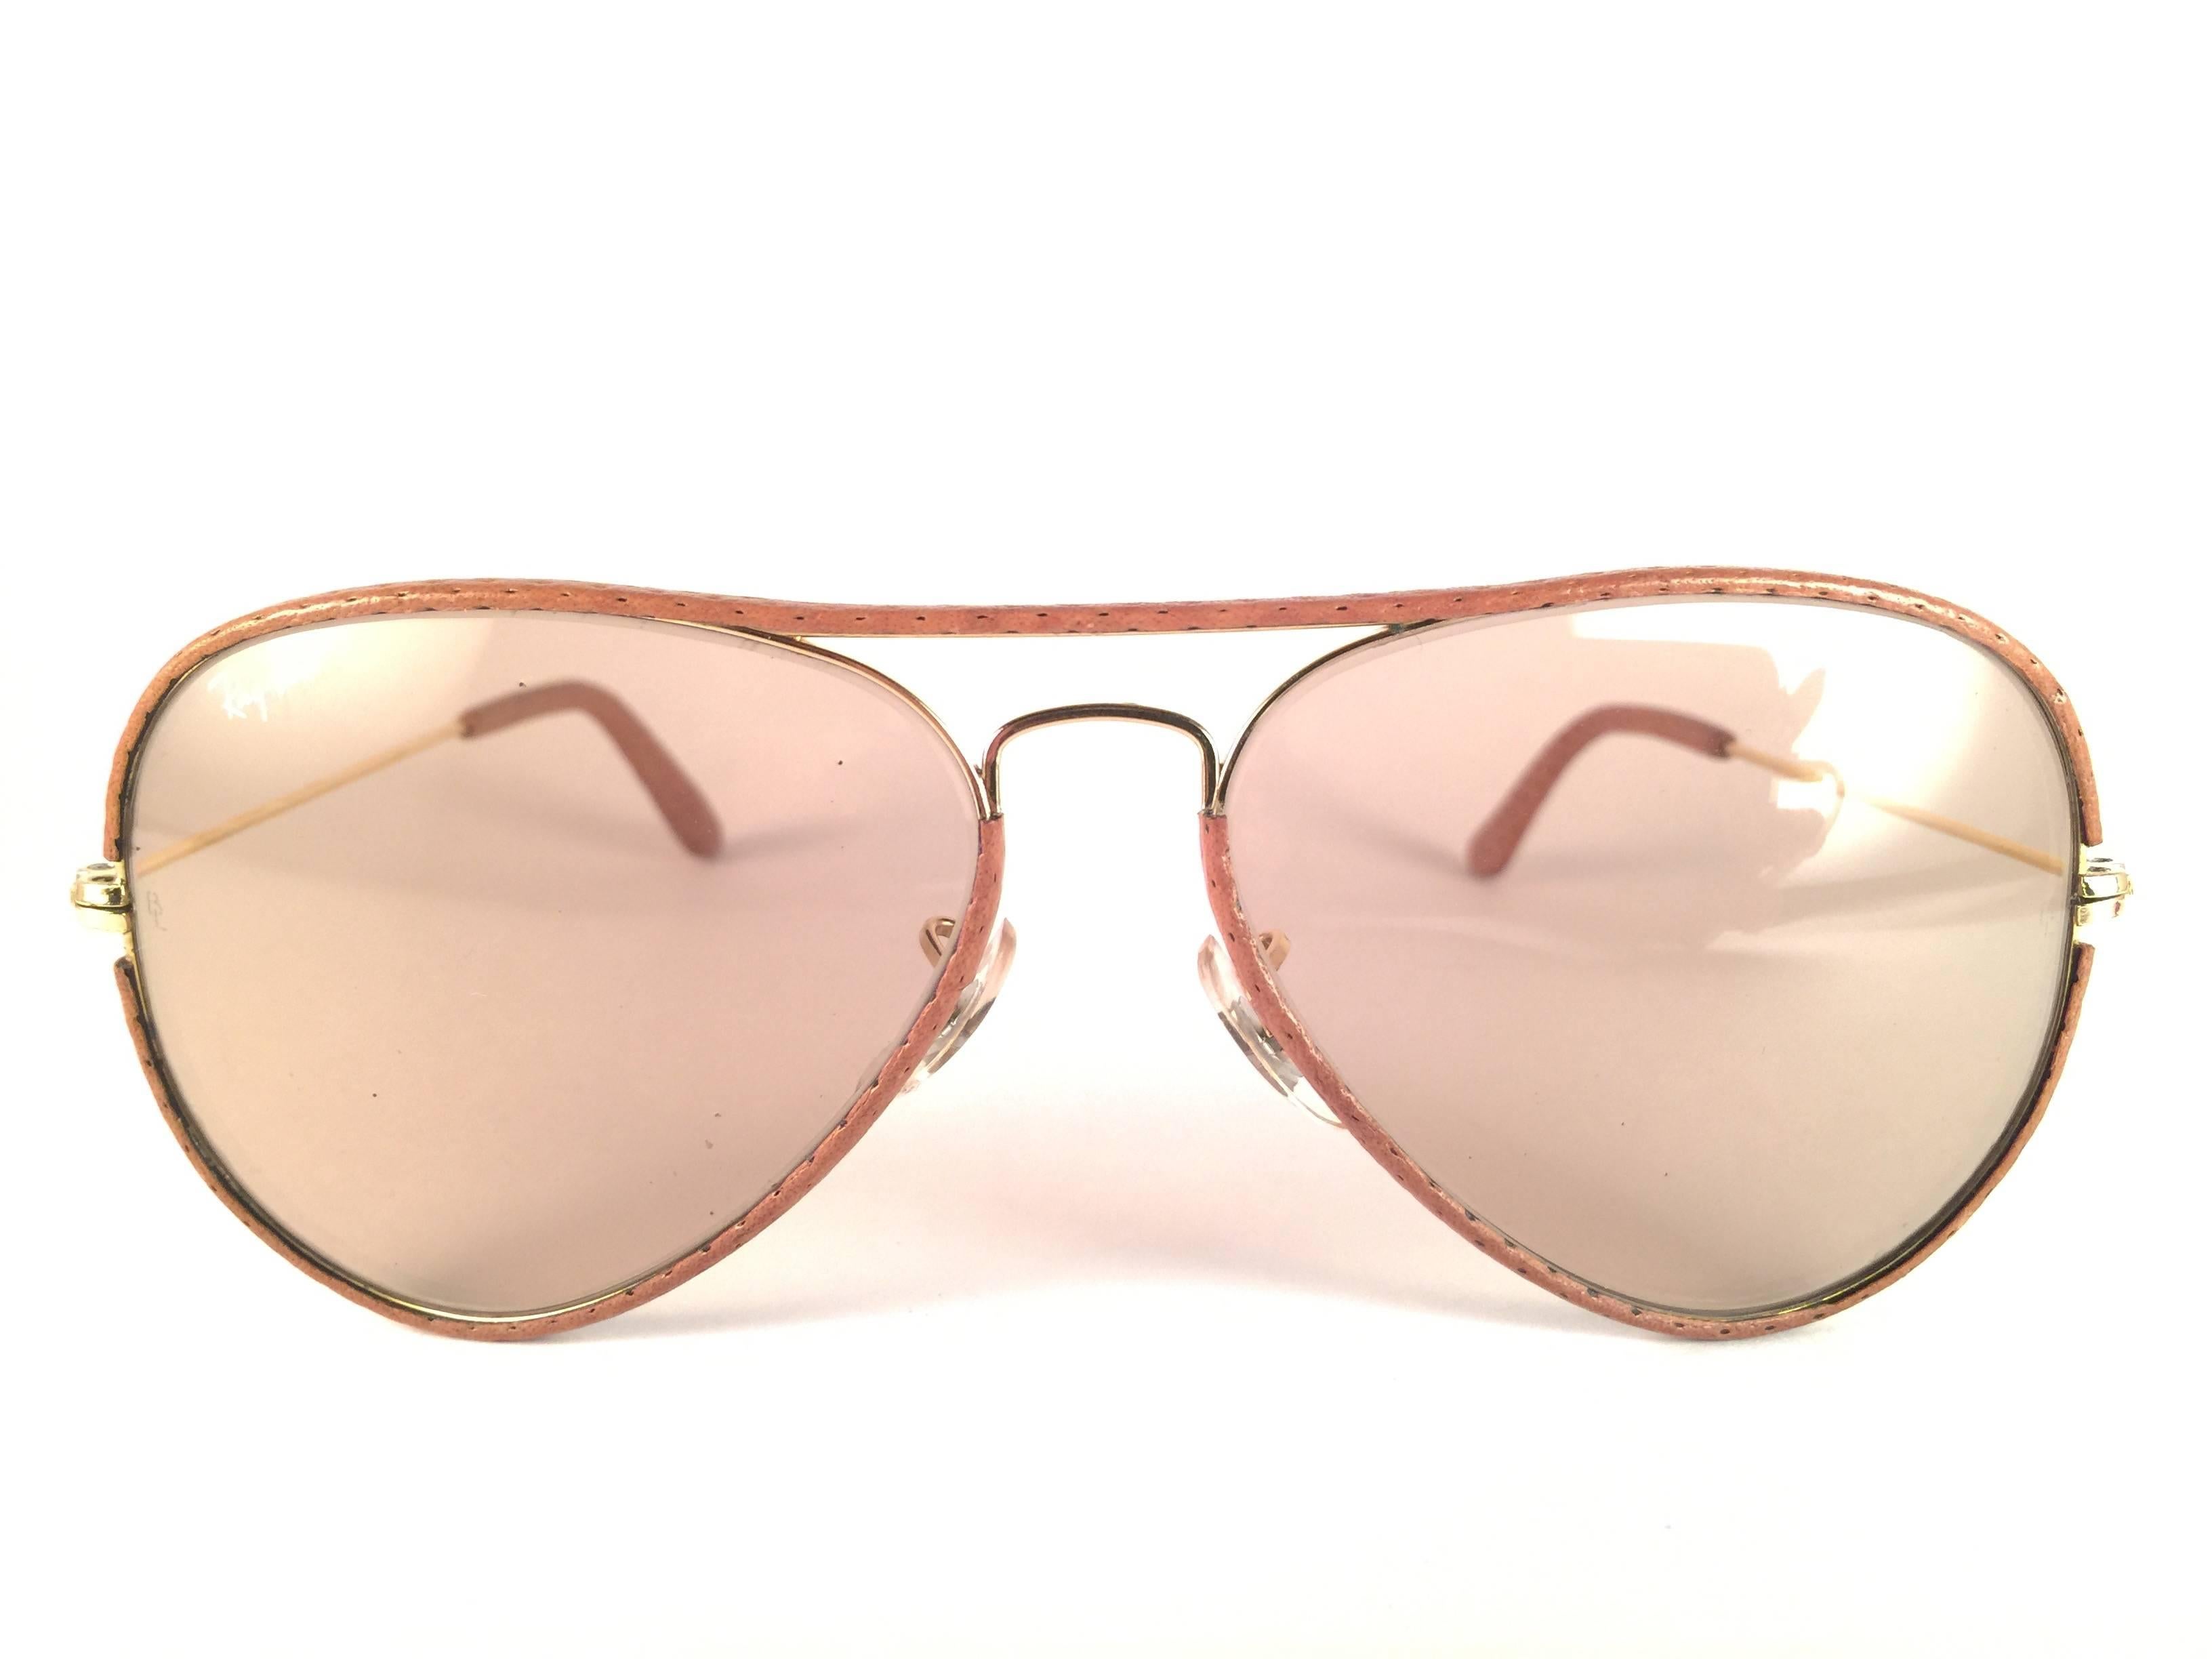 New Vintage Ray Ban Leathers Aviator 58mm in perforated beige leather with gold metal combination frame sporting light changeable to brown lenses with white Ray Ban logo.   B&L etched in the lenses, so mid 1970's.   Comes with its original Ray Ban